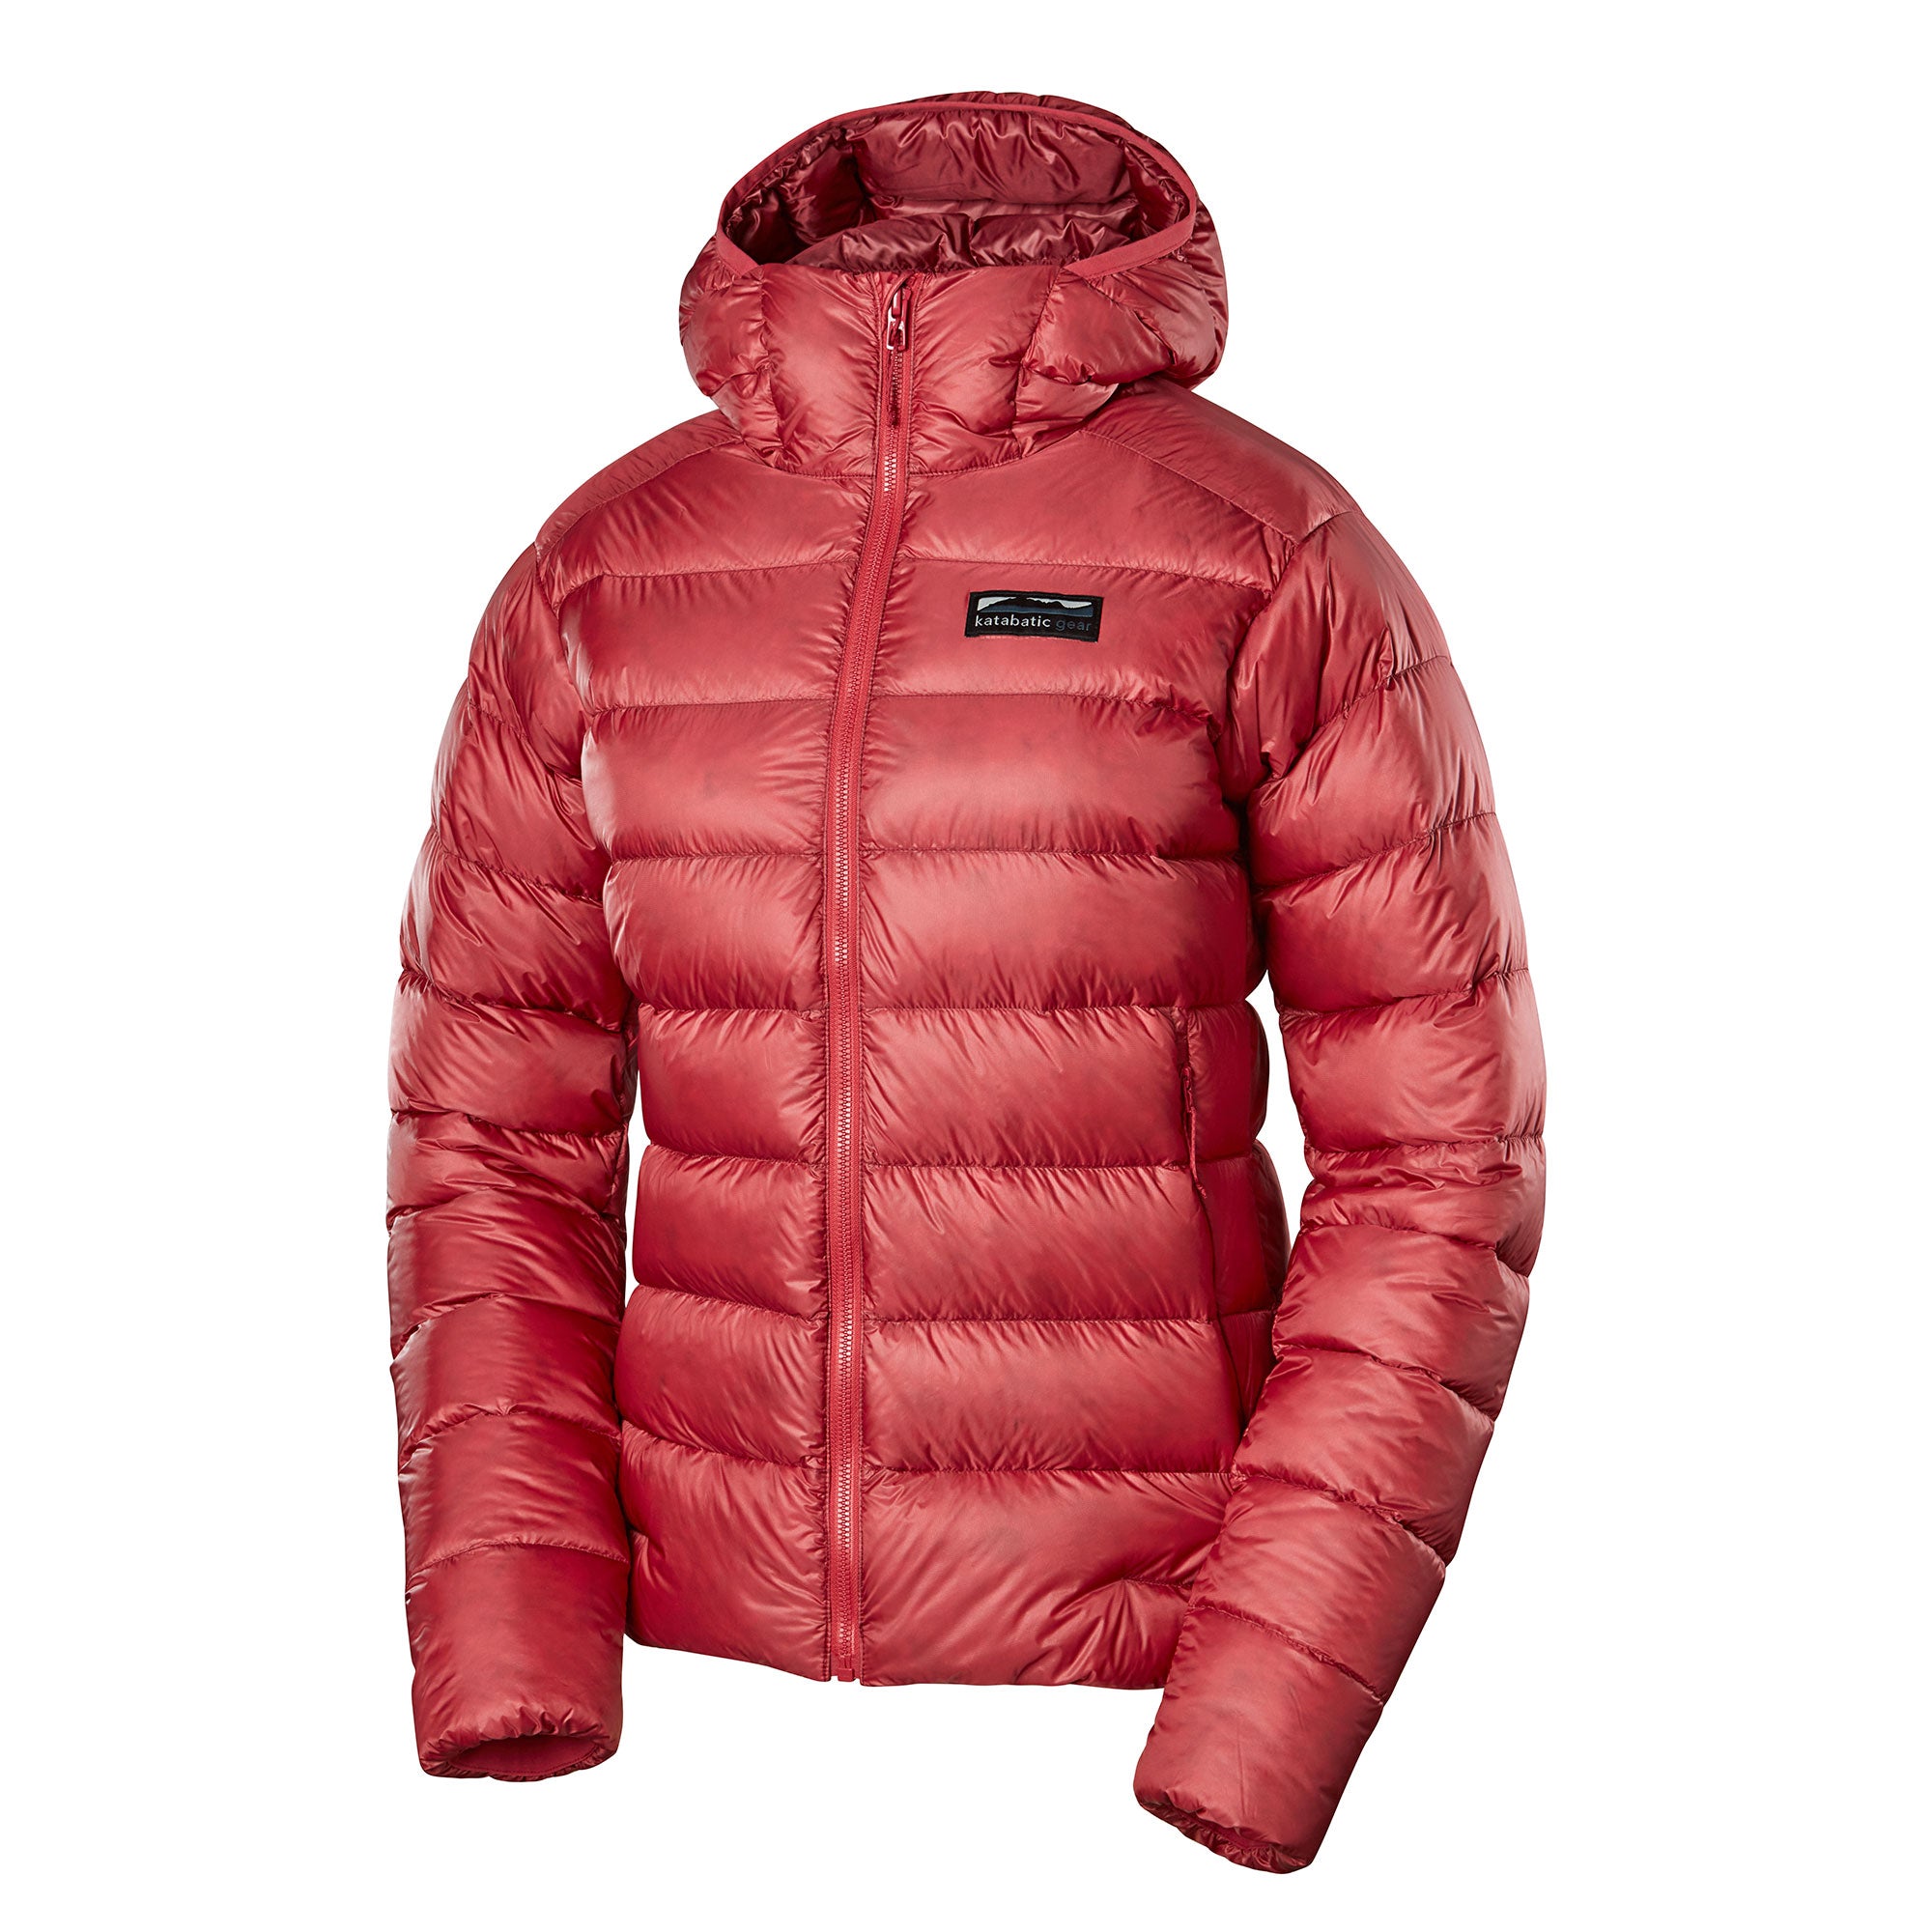 LLBean down jacket: Is tenacious tape my only option, or can I